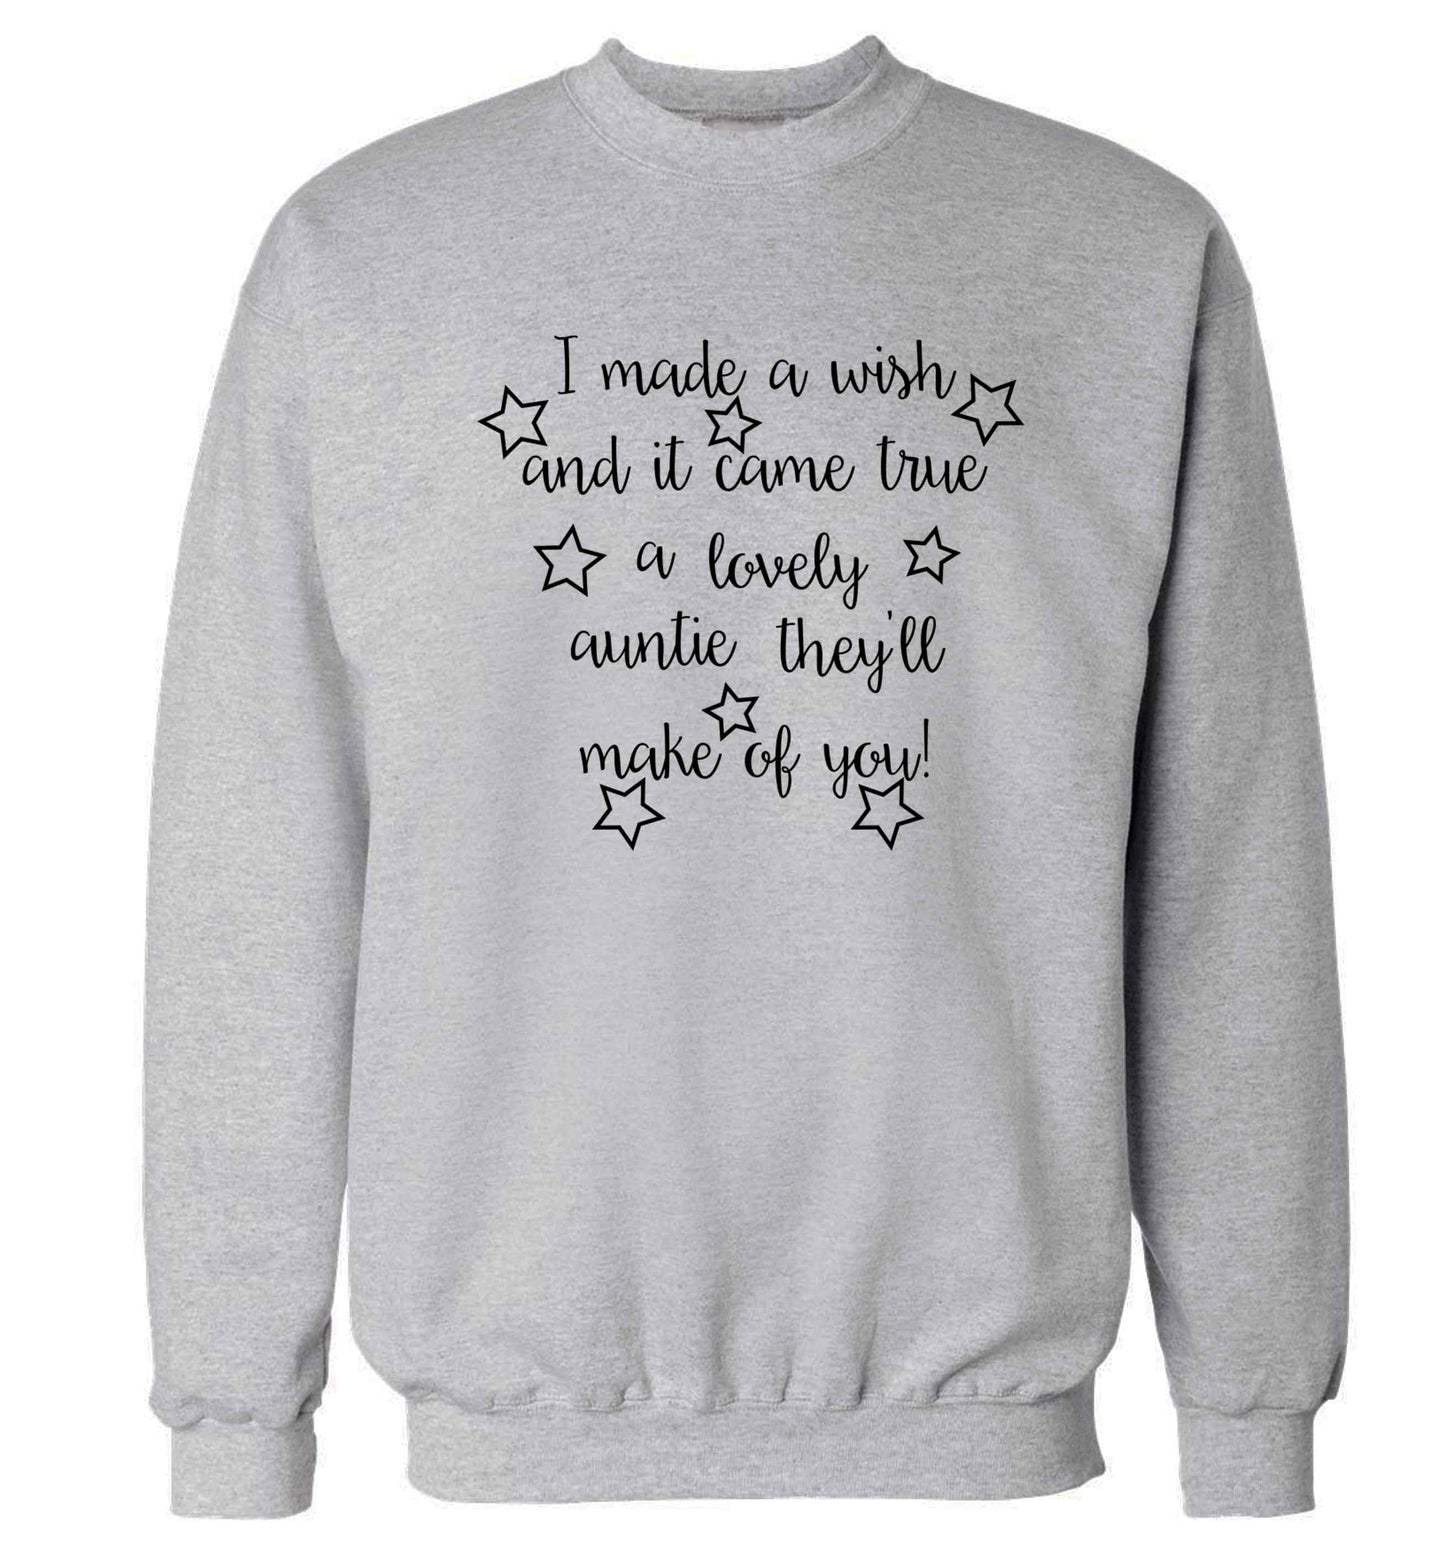 I made a wish and it came true a lovely auntie they'll make of you! Adult's unisex grey Sweater 2XL